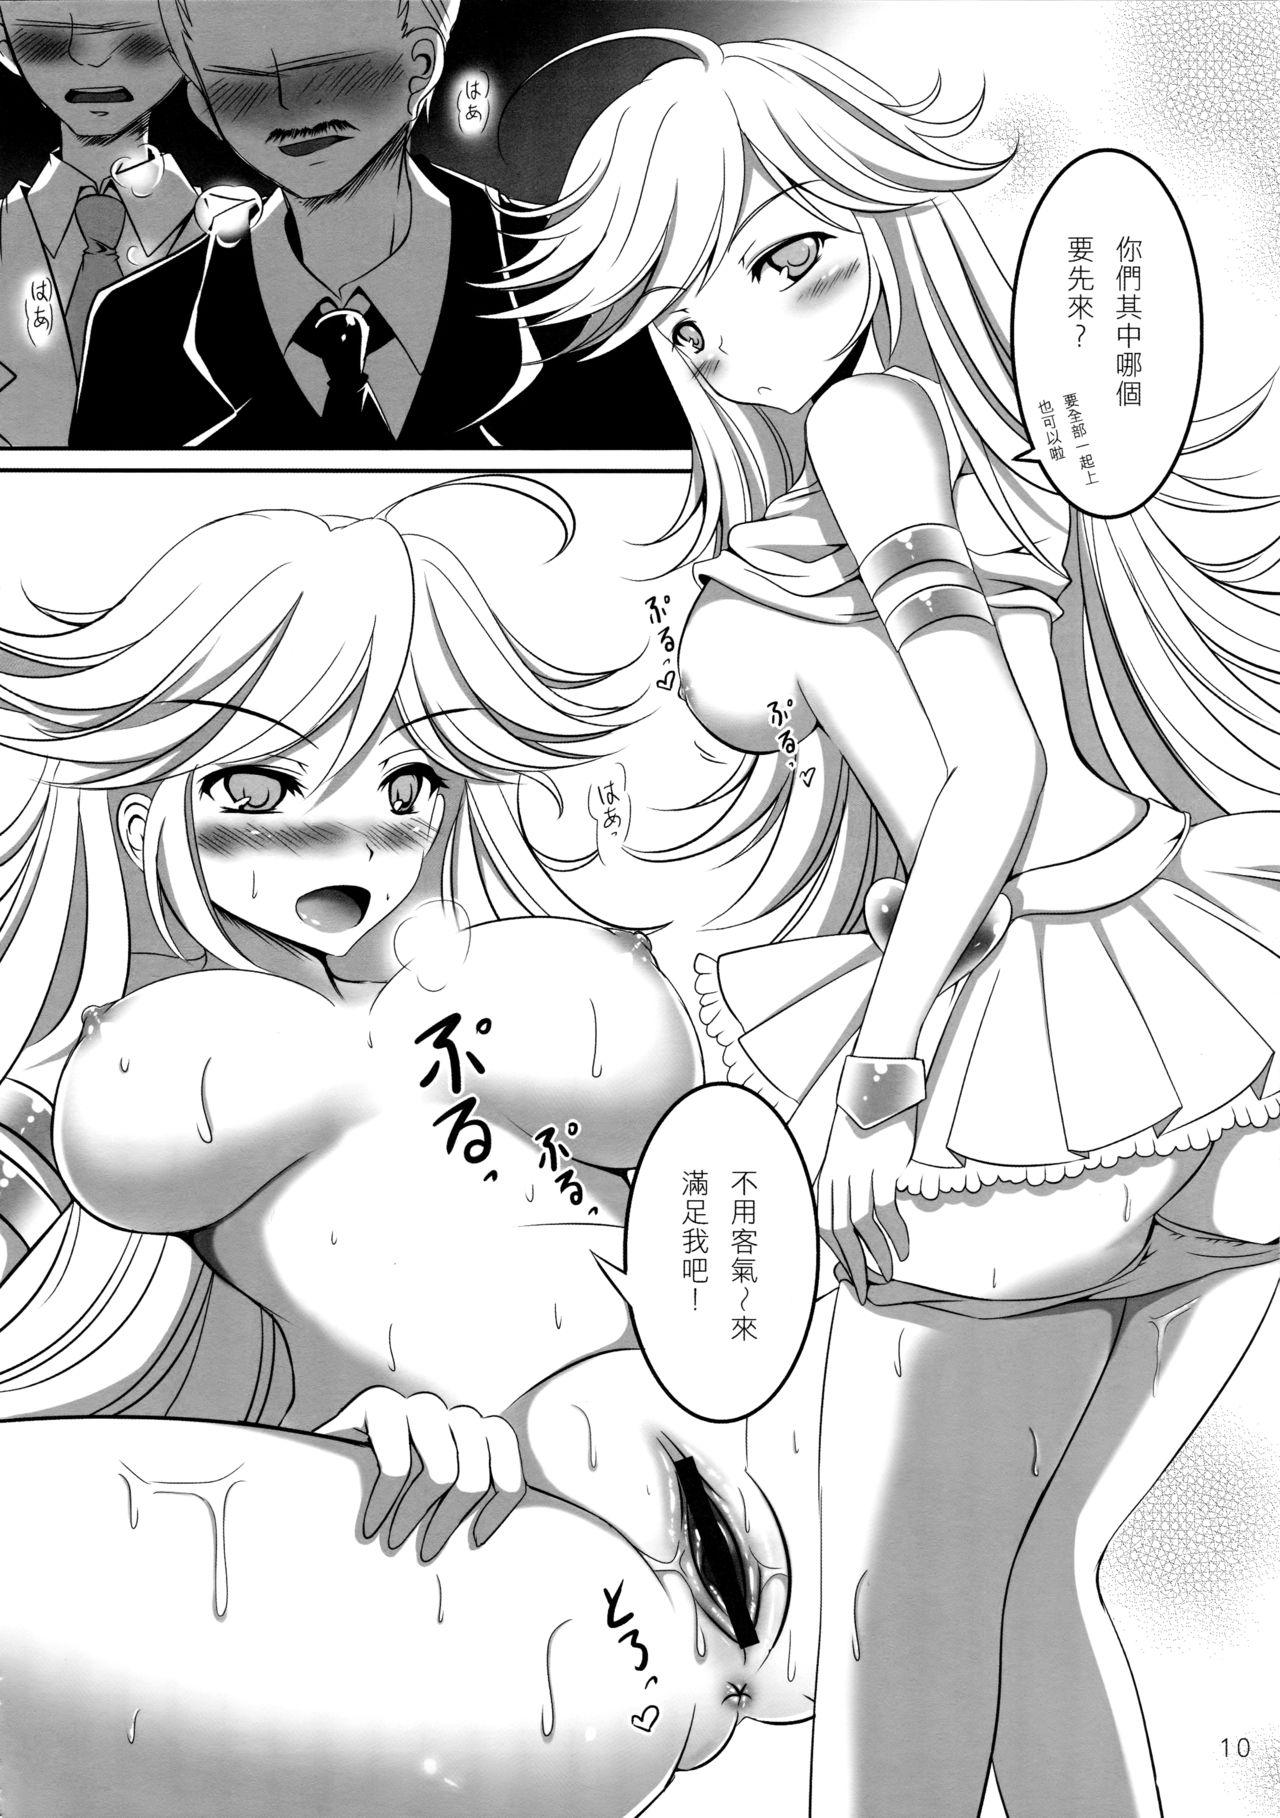 Messy Angel Bitches! - Panty and stocking with garterbelt Spa - Page 10